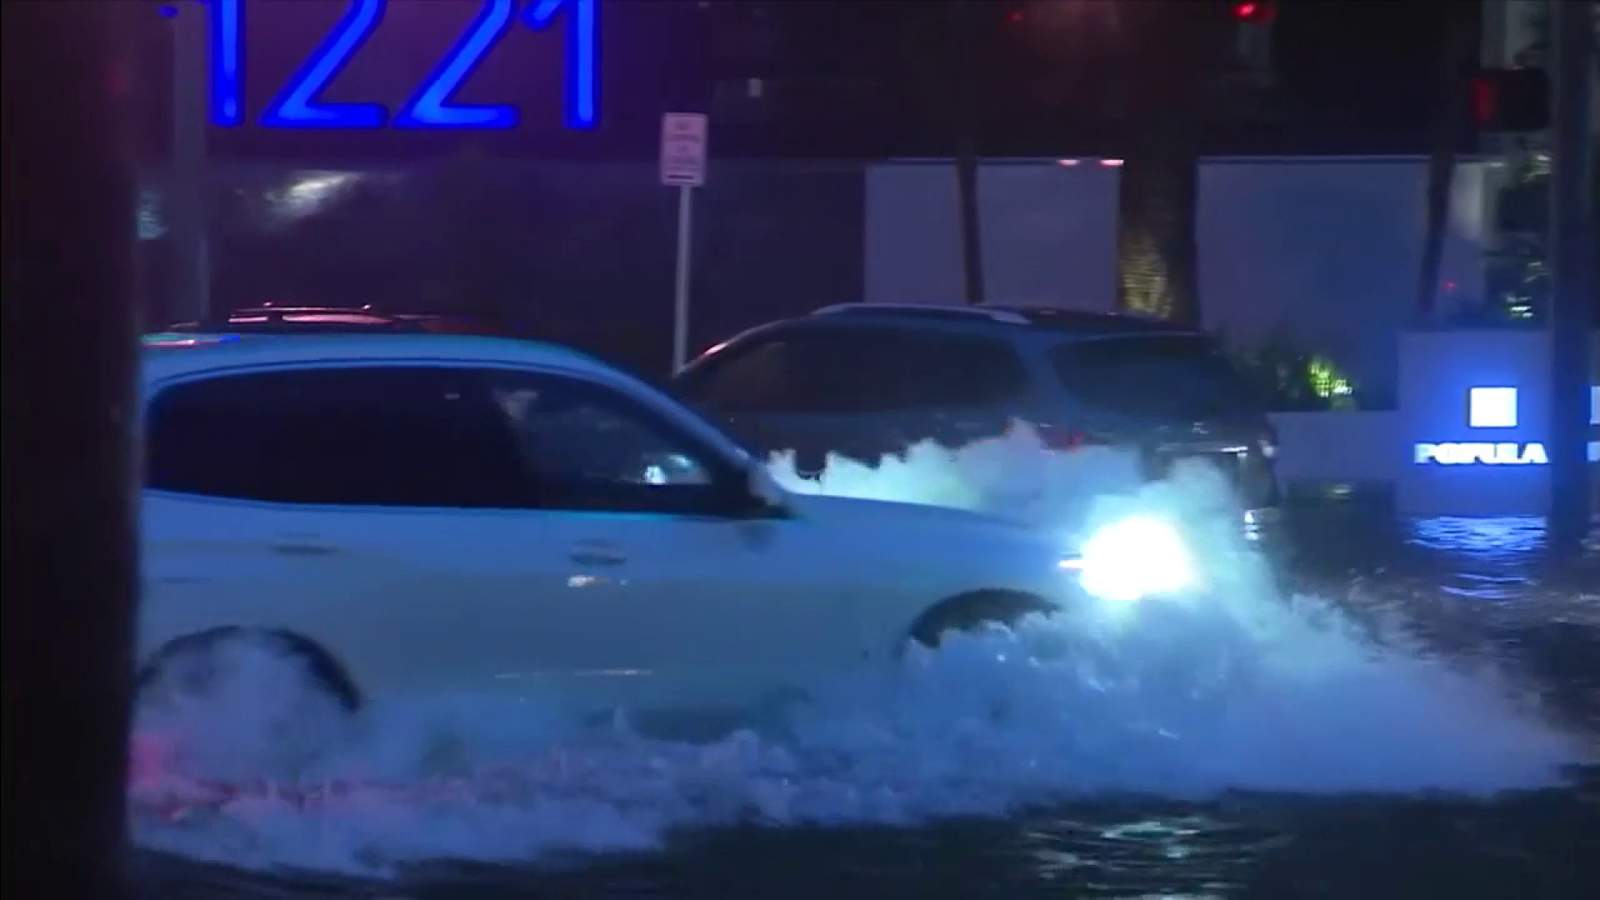 Streets of Brickell, other Miami-Dade areas impassable due to flash flooding from Tropical Storm Eta